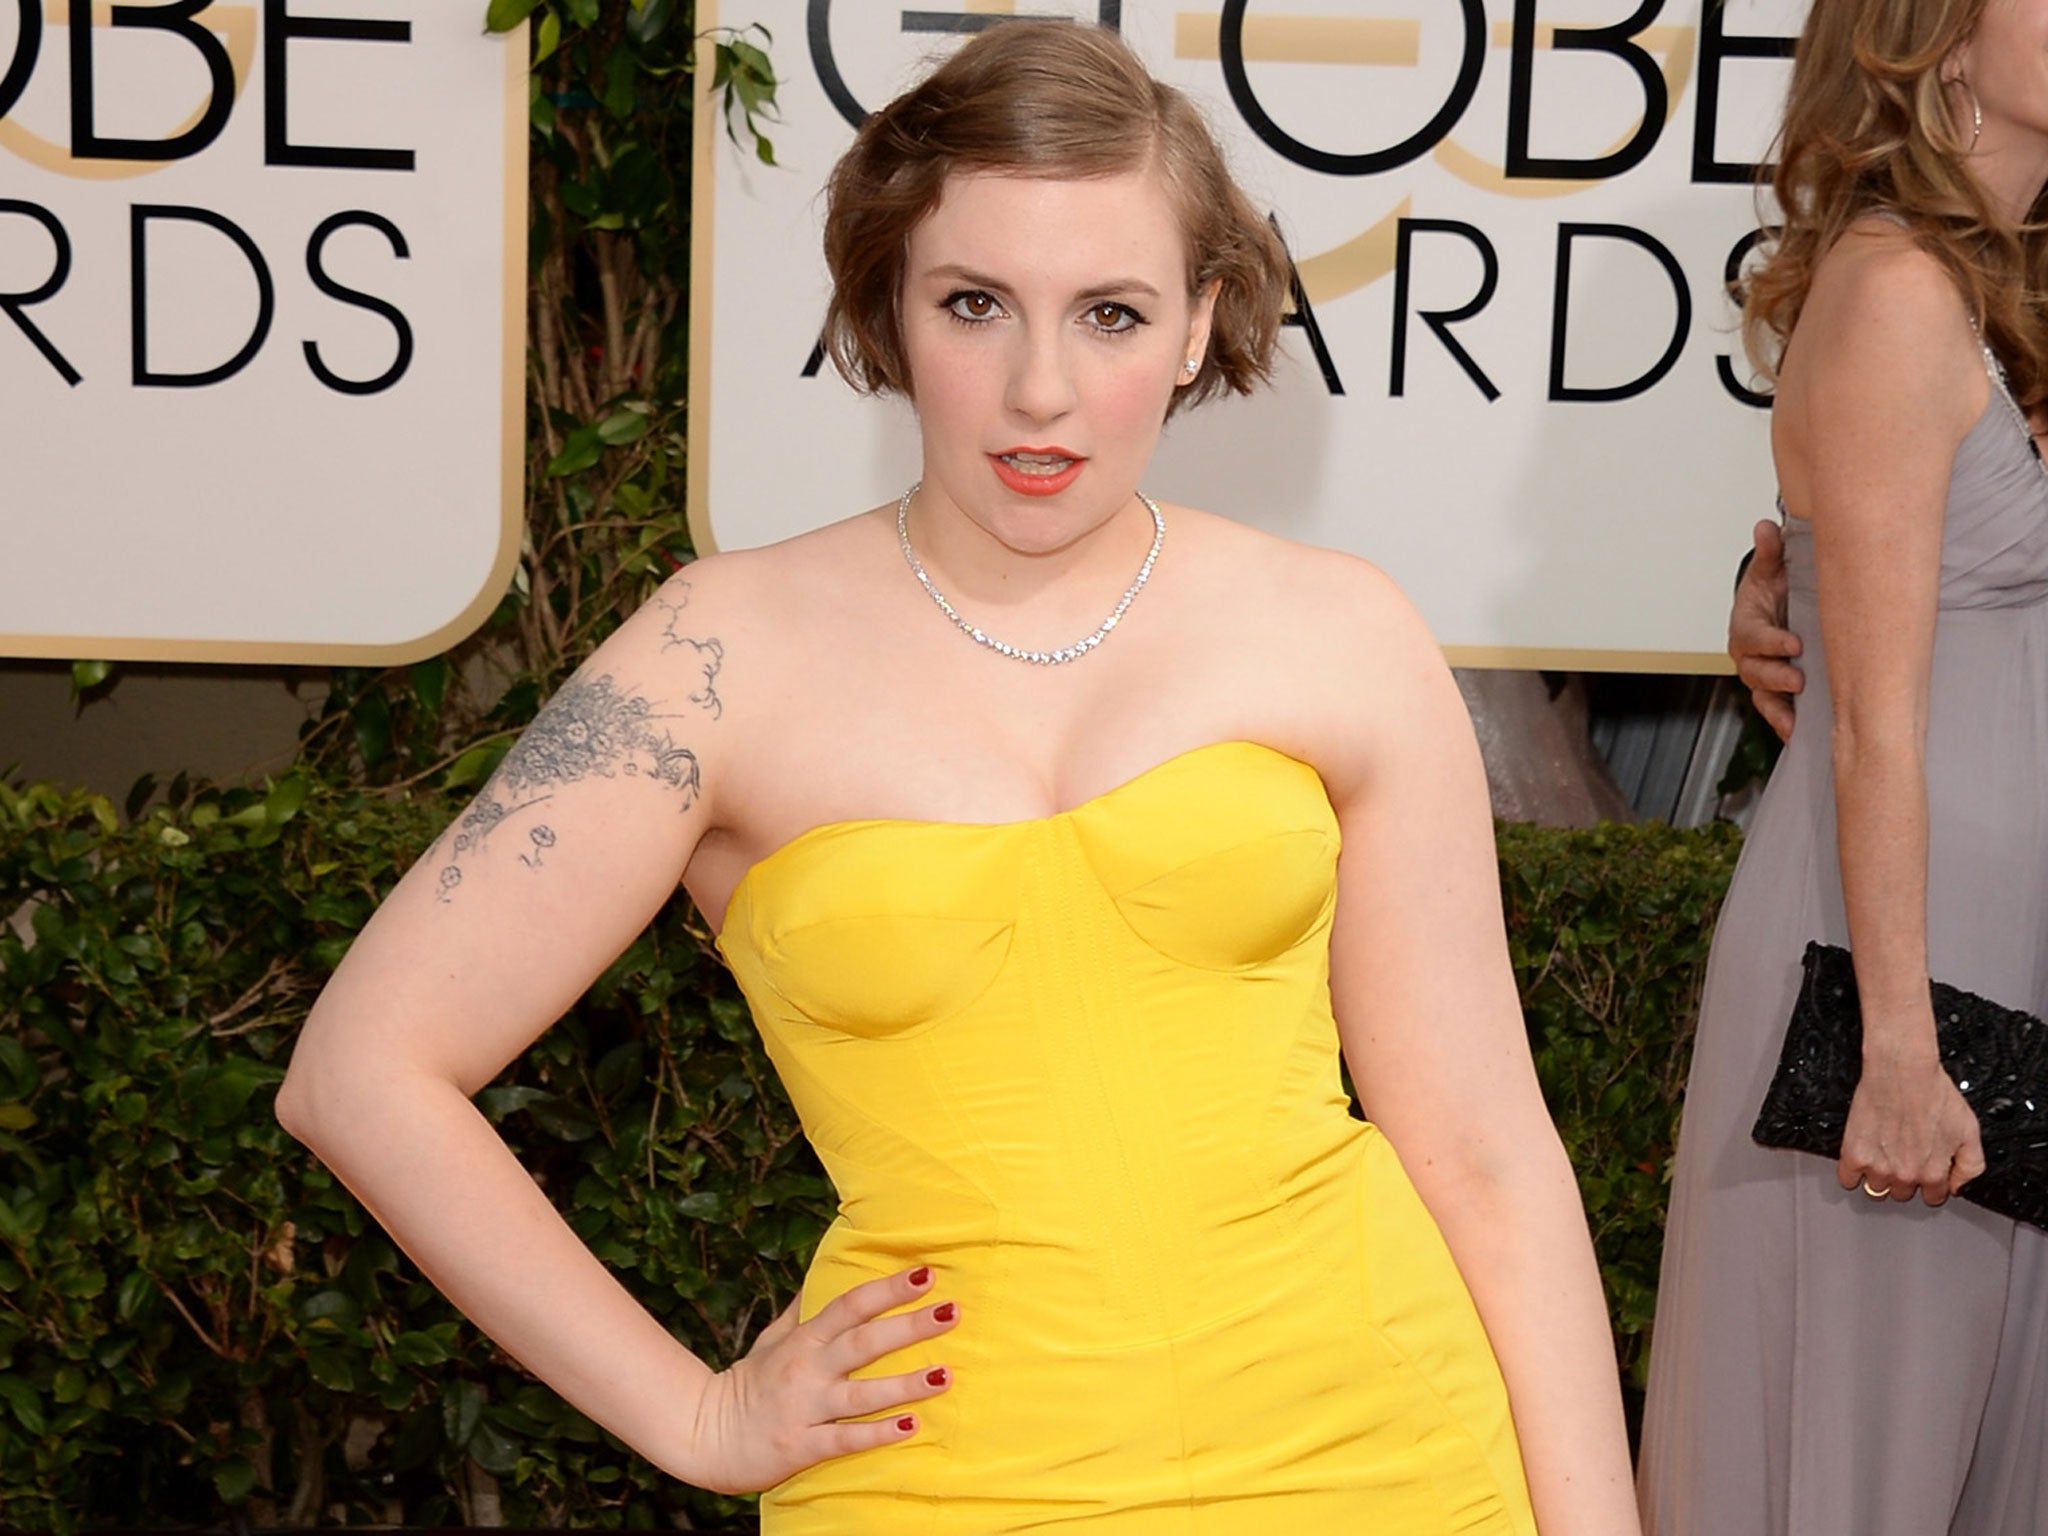 andrew traugh recommends Girls Lena Dunham Nude